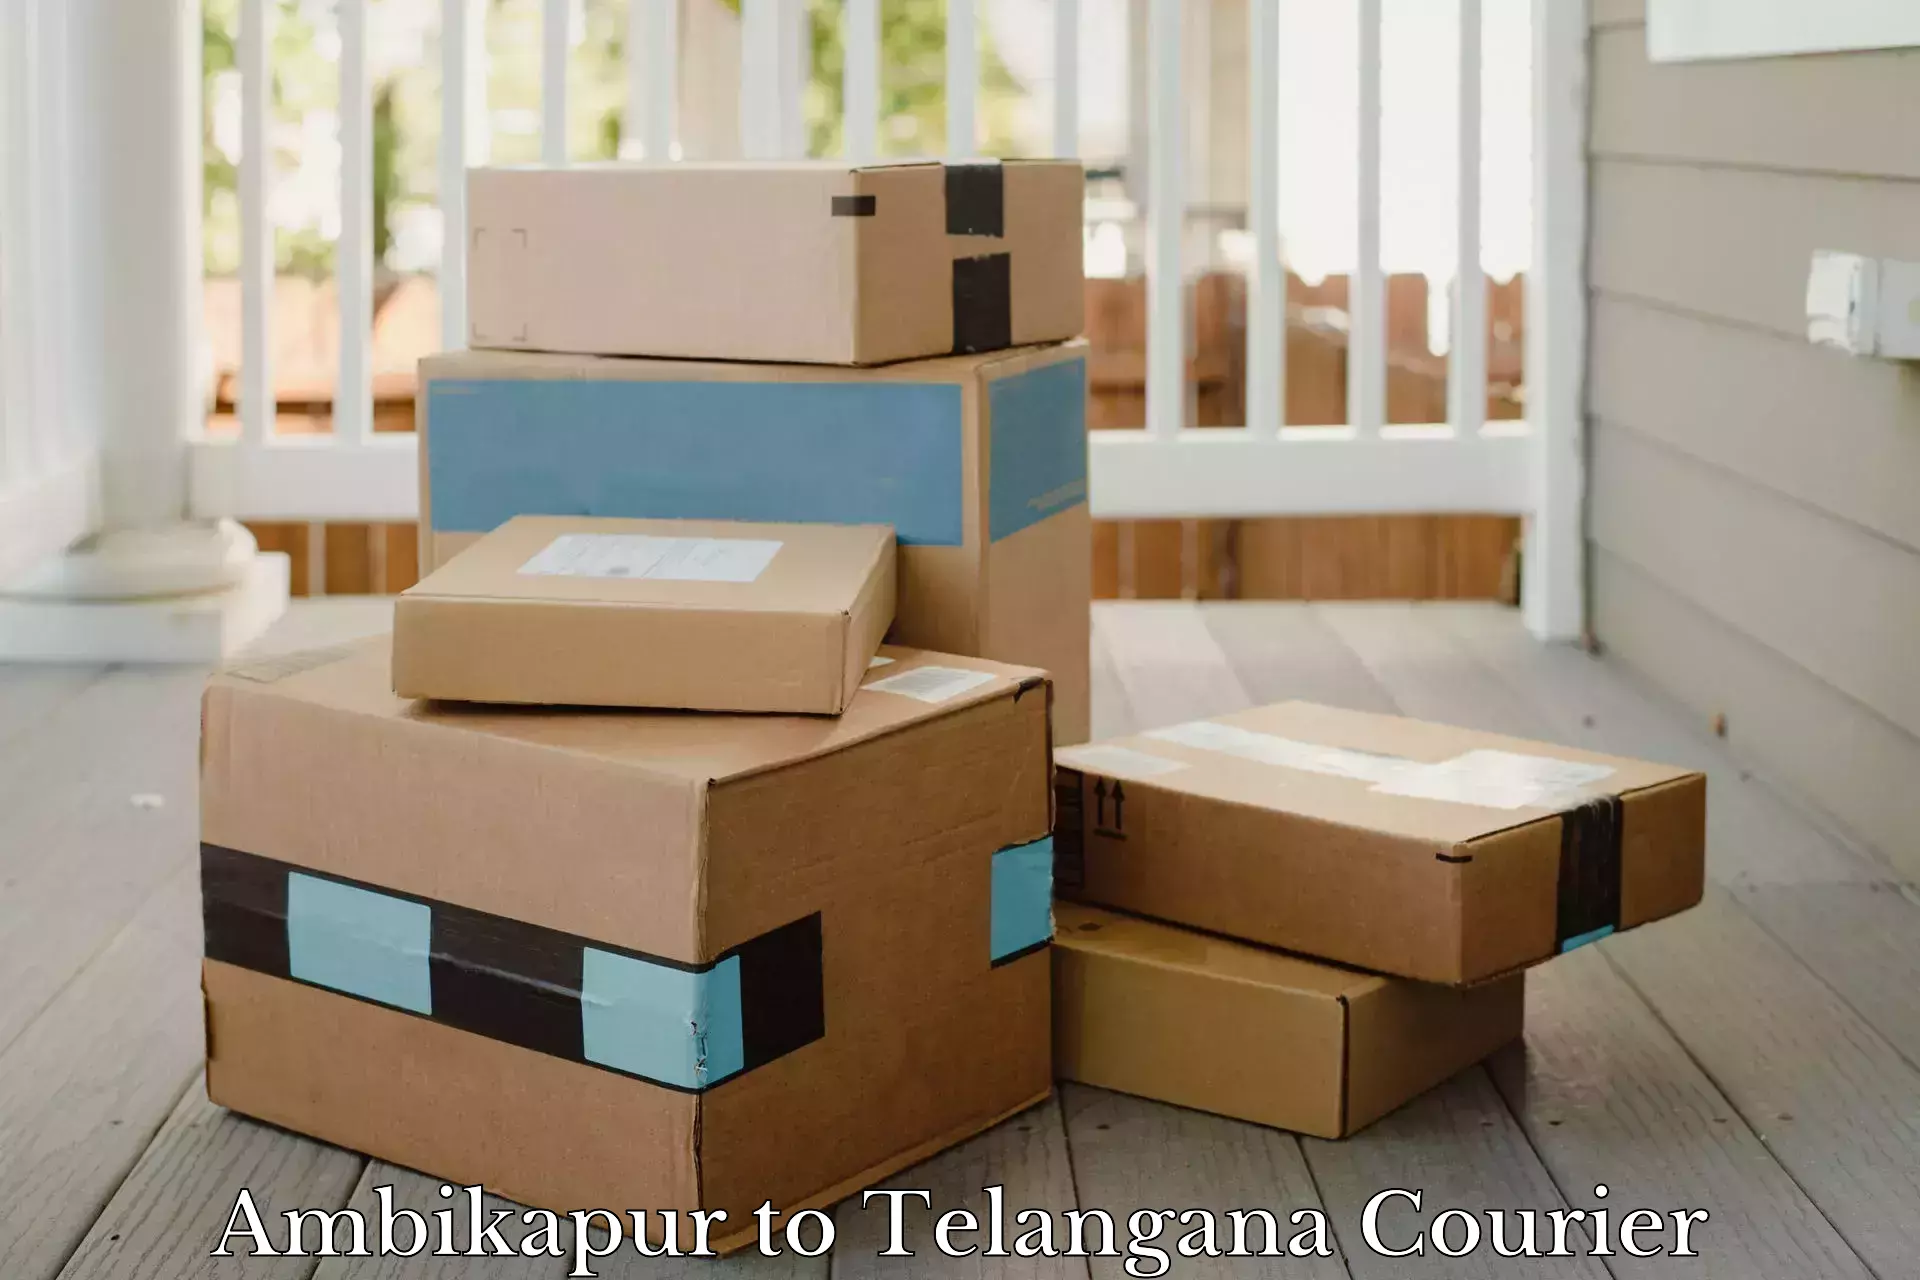 Flexible delivery scheduling Ambikapur to Telangana